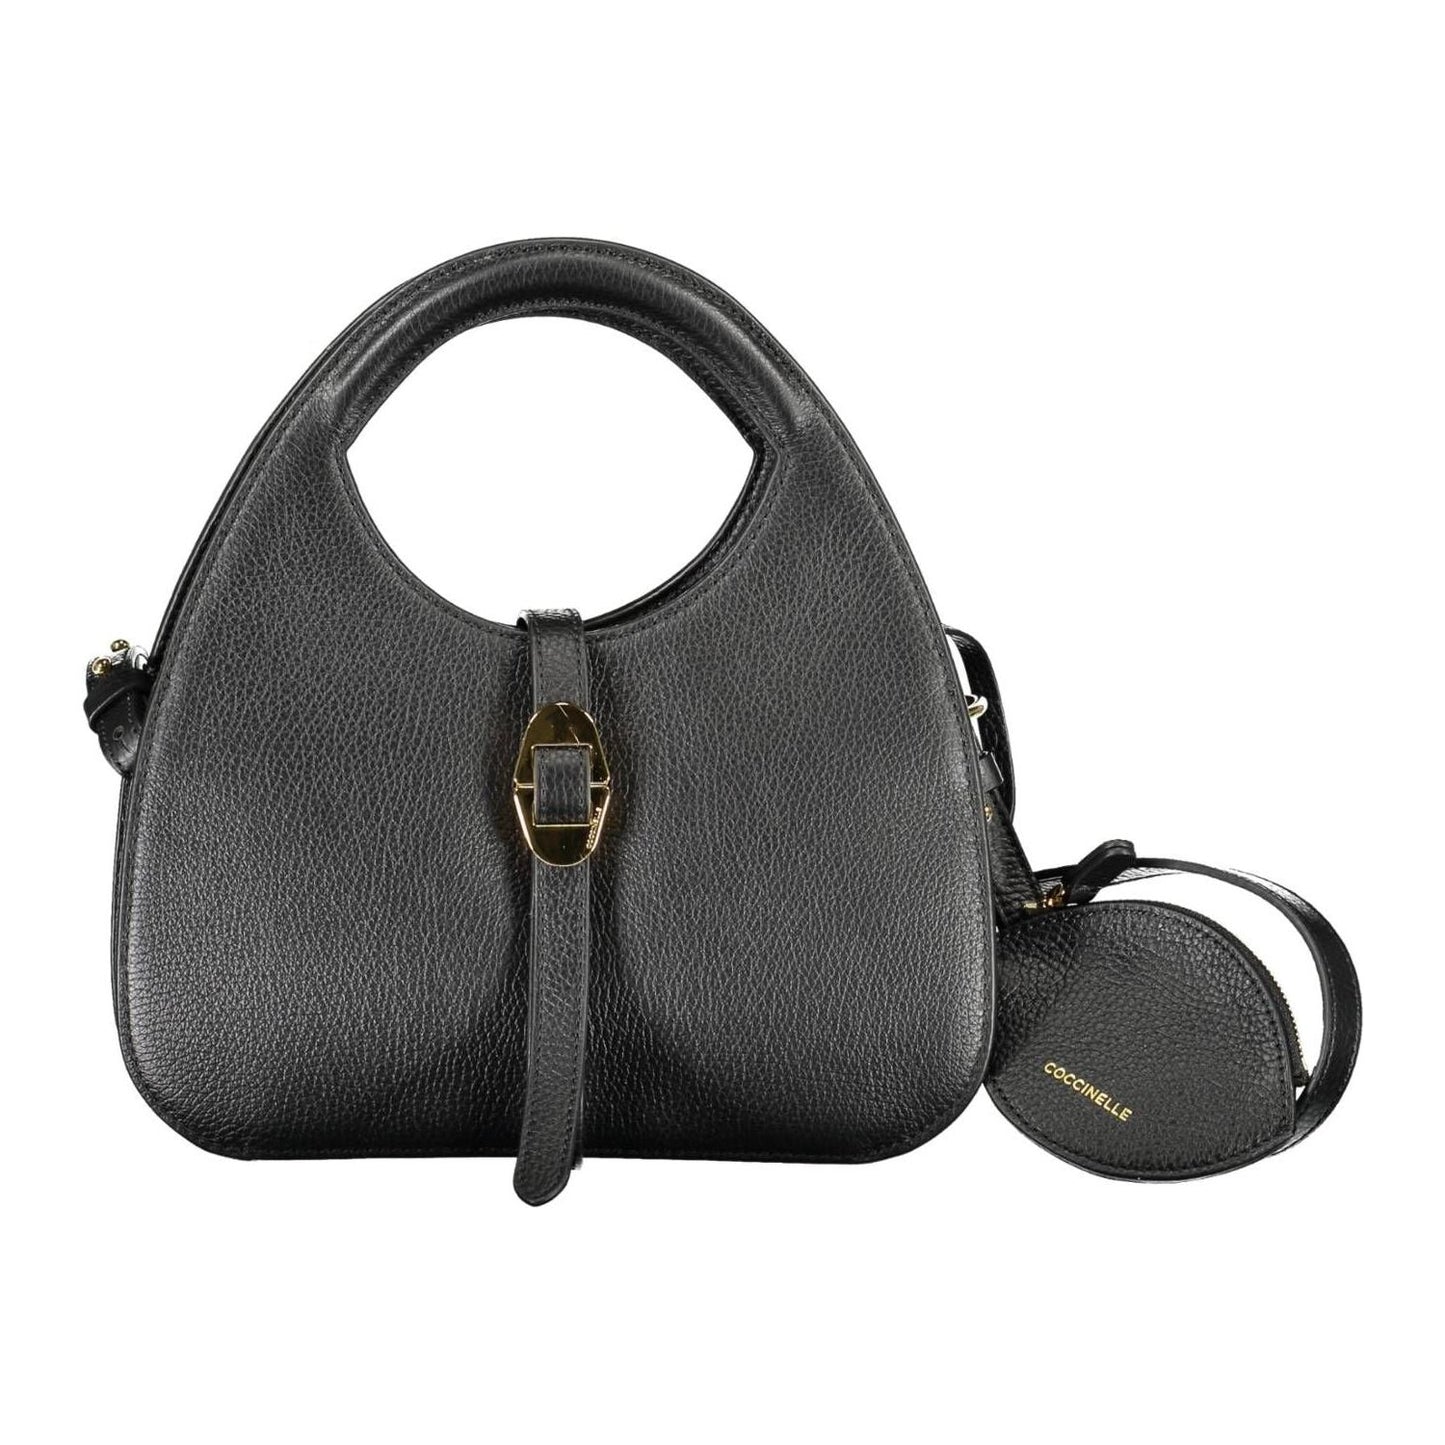 Coccinelle Elegant Duo-Compartment Leather Handbag elegant-duo-compartment-leather-handbag